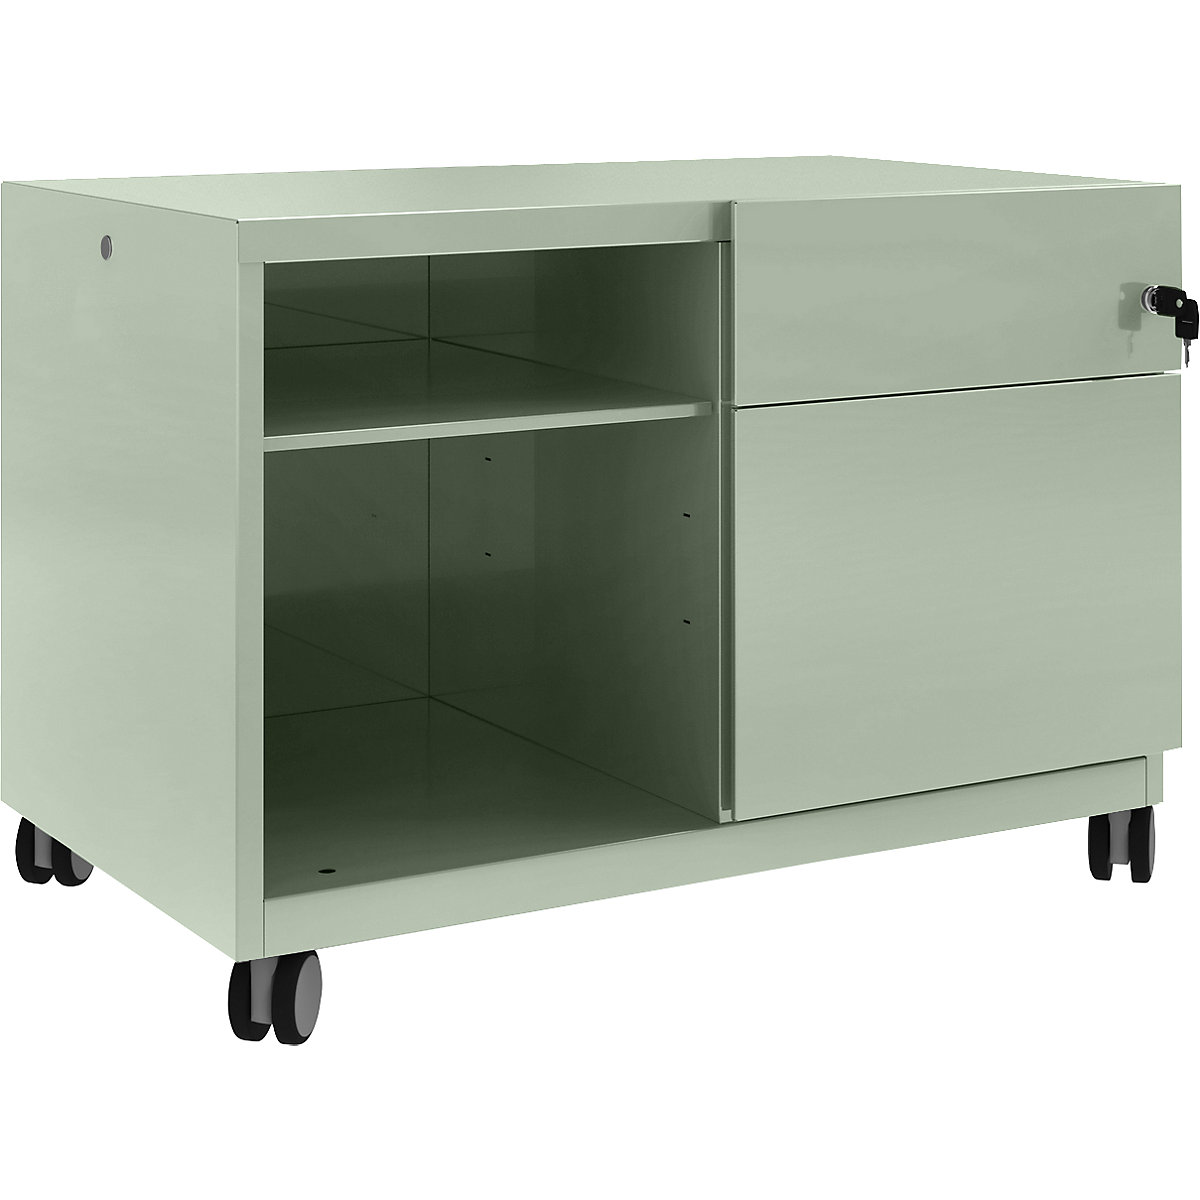 Note™ CADDY, HxBxT 563 x 800 x 490 mm – BISLEY, 1 universal drawer and suspension file drawer on the right, regent-3